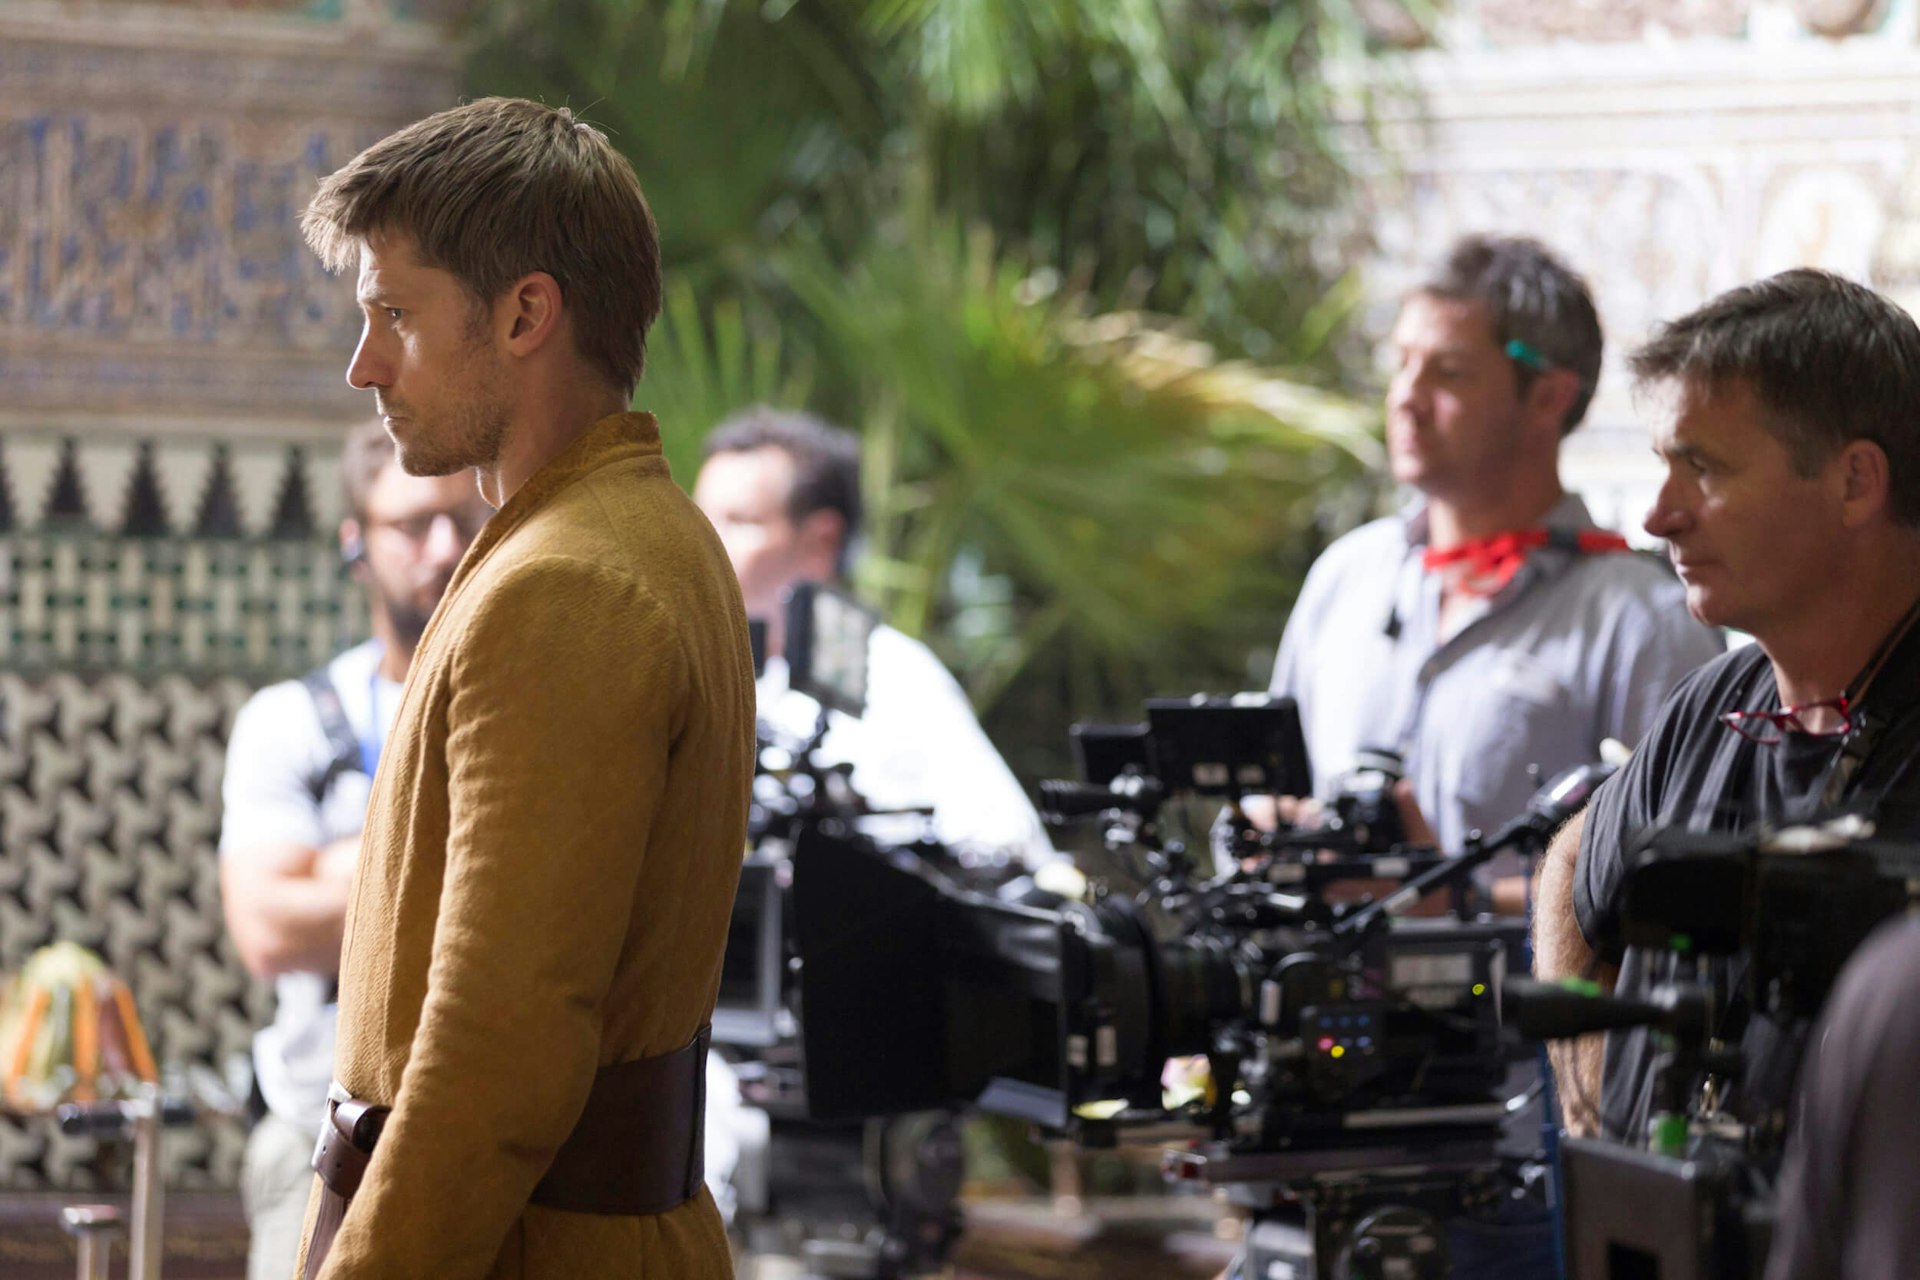 Actor Nikolaj Coster-Waldau stands in front of the camera on set in Seville